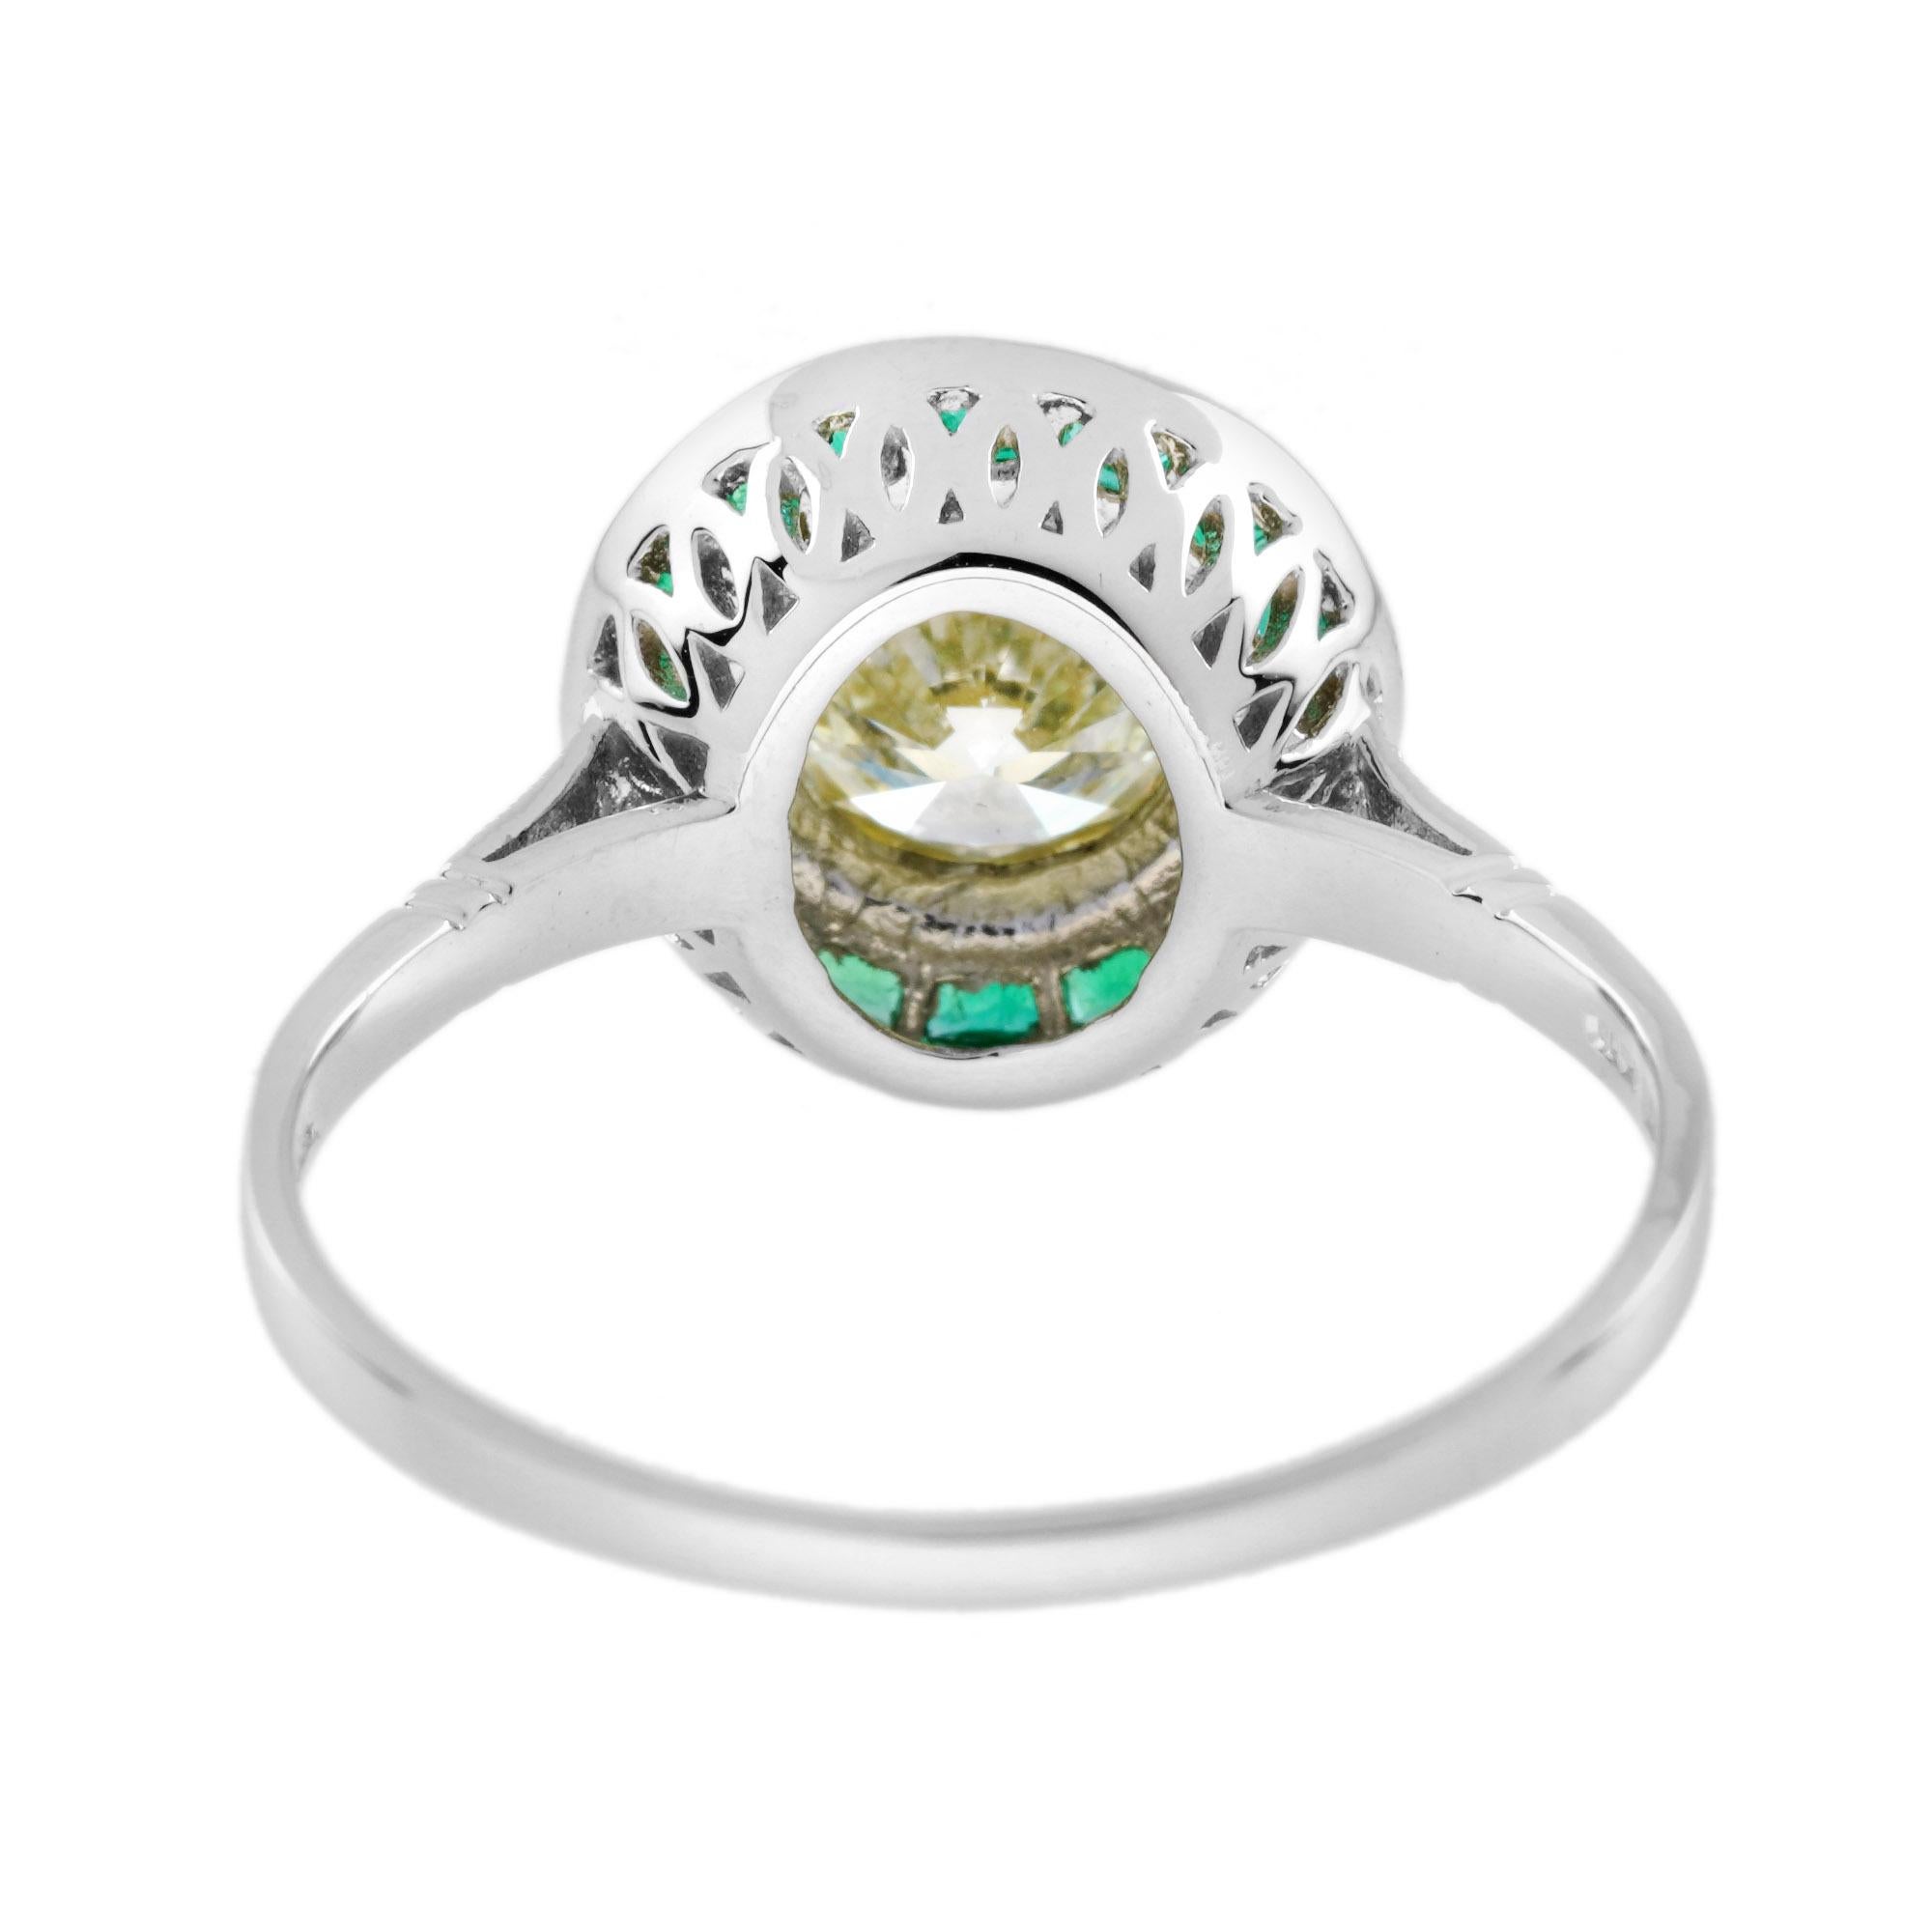 Certified 1 Ct. Diamond and Emerald Art Deco Style Target Ring in Platinum 950 For Sale 1